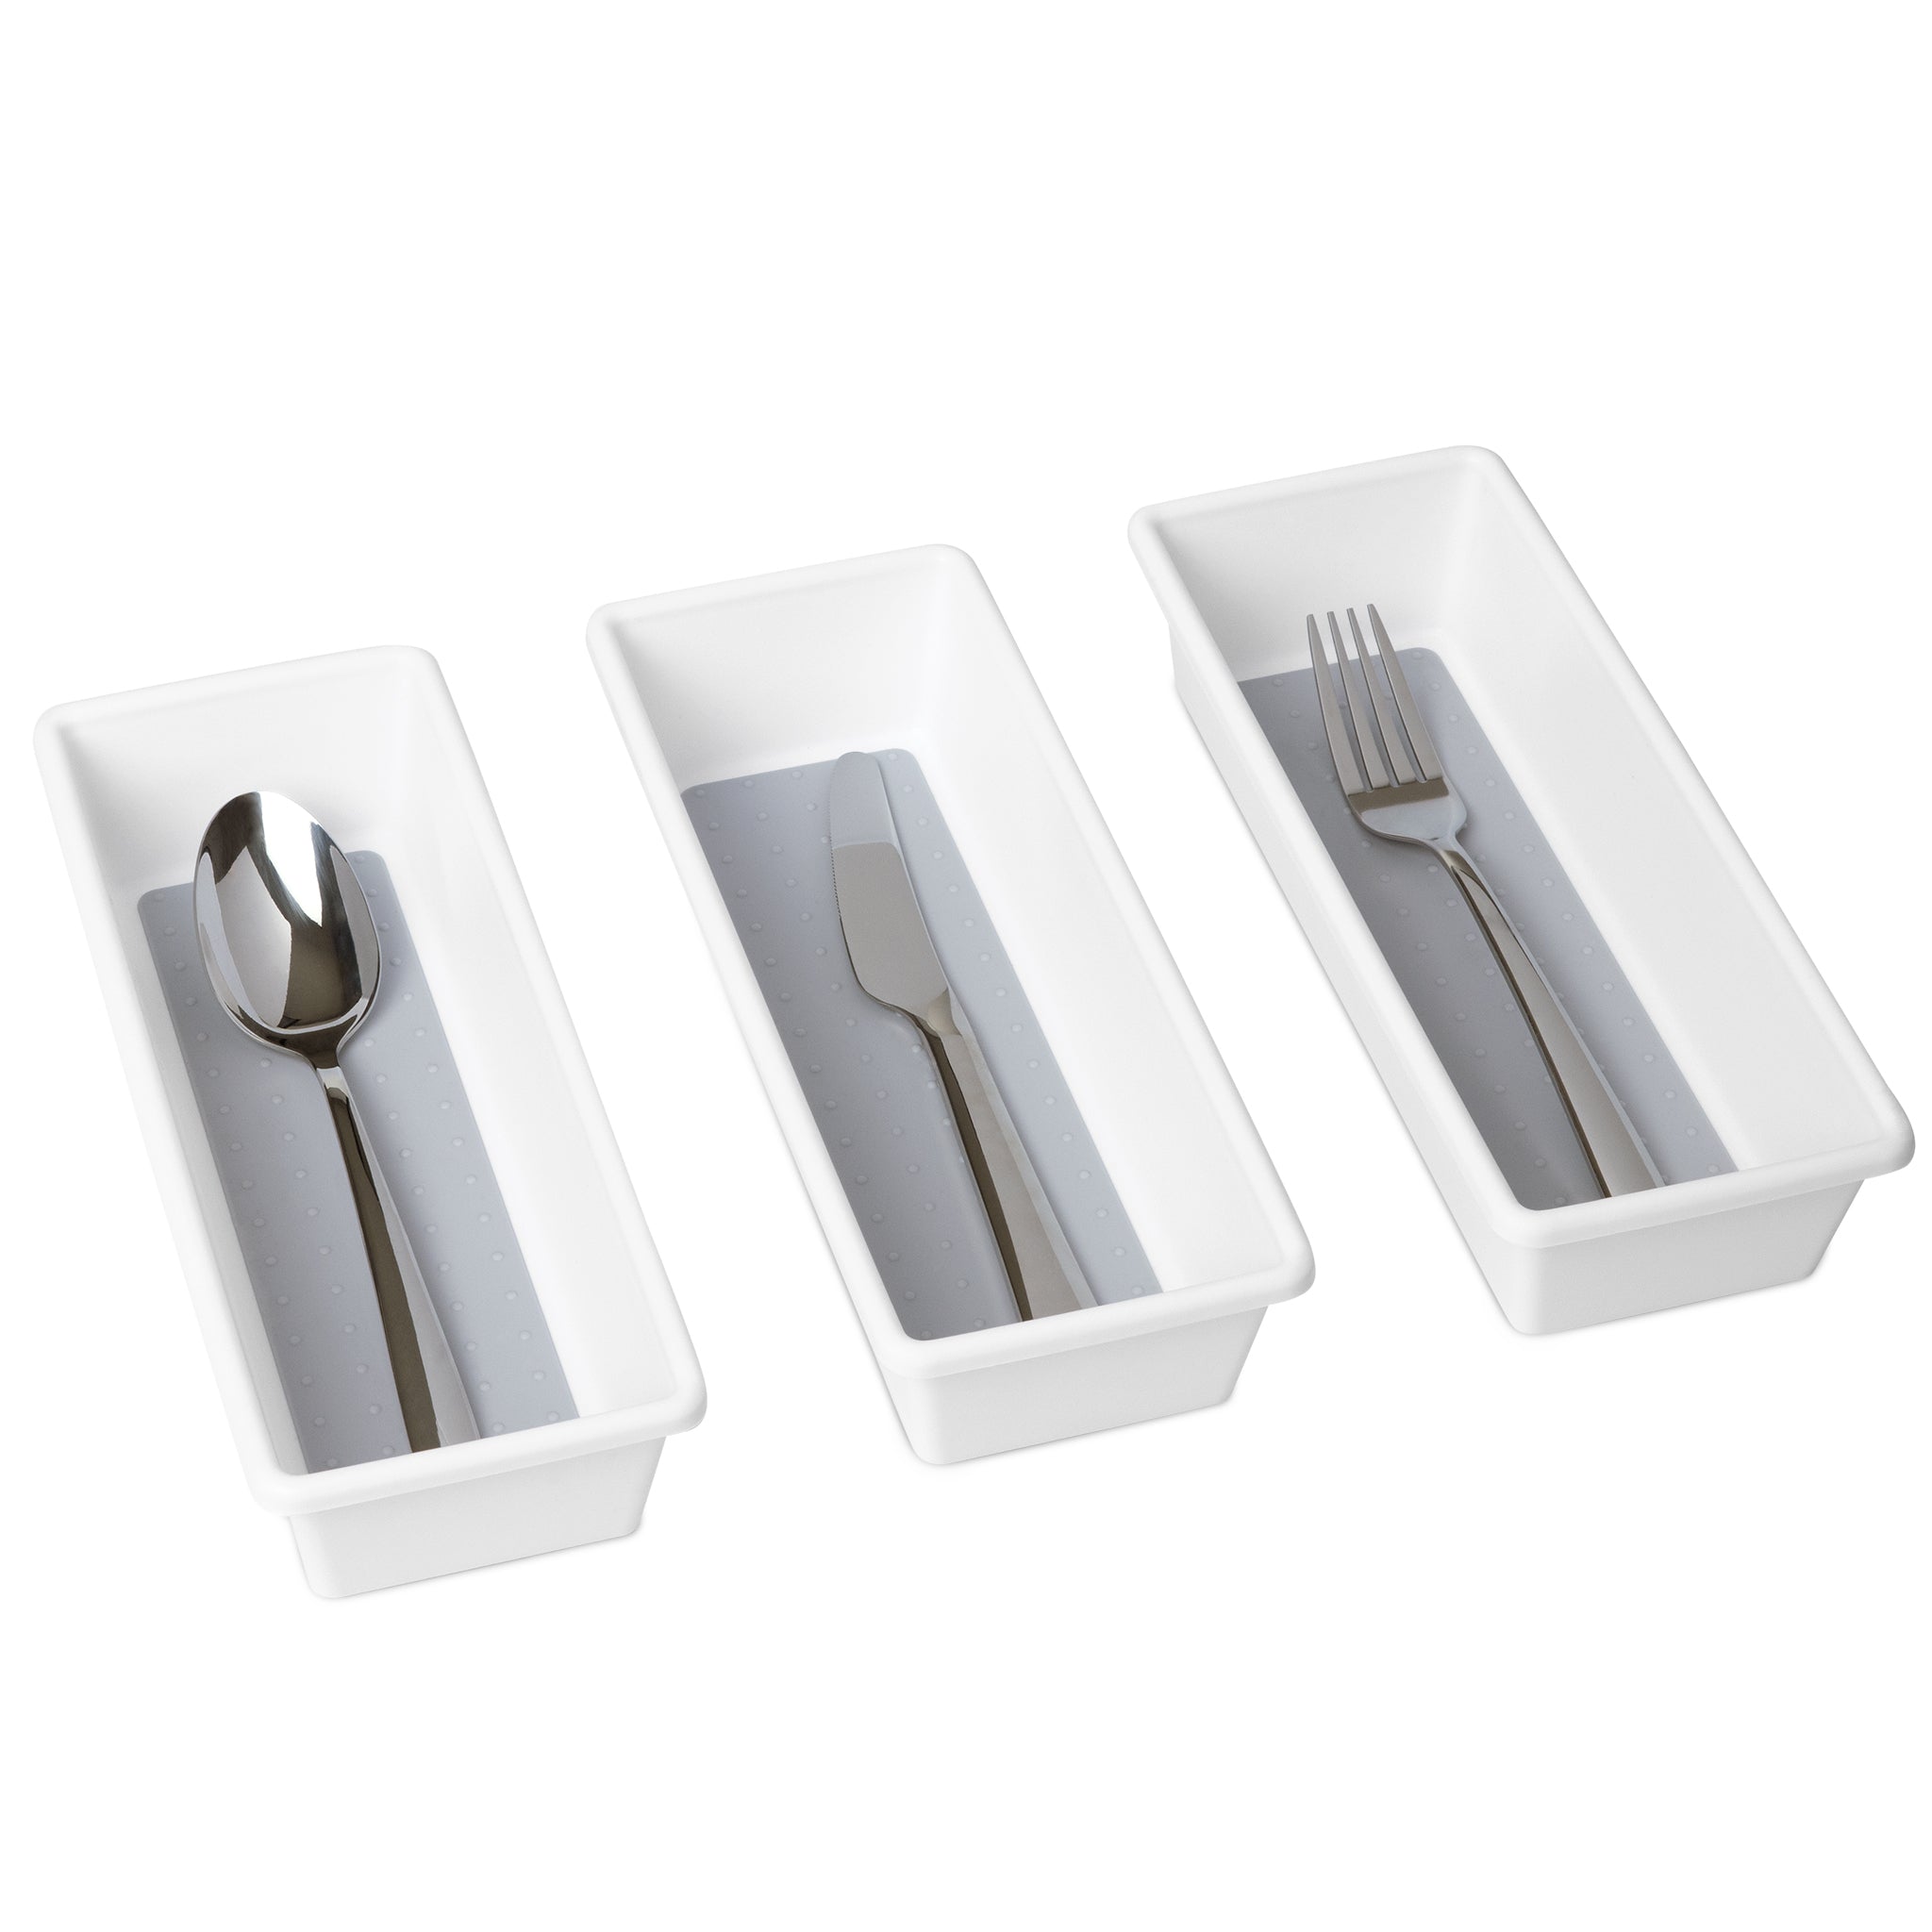 Black Square Cutlery Drainer by 5Five - Simply Smart